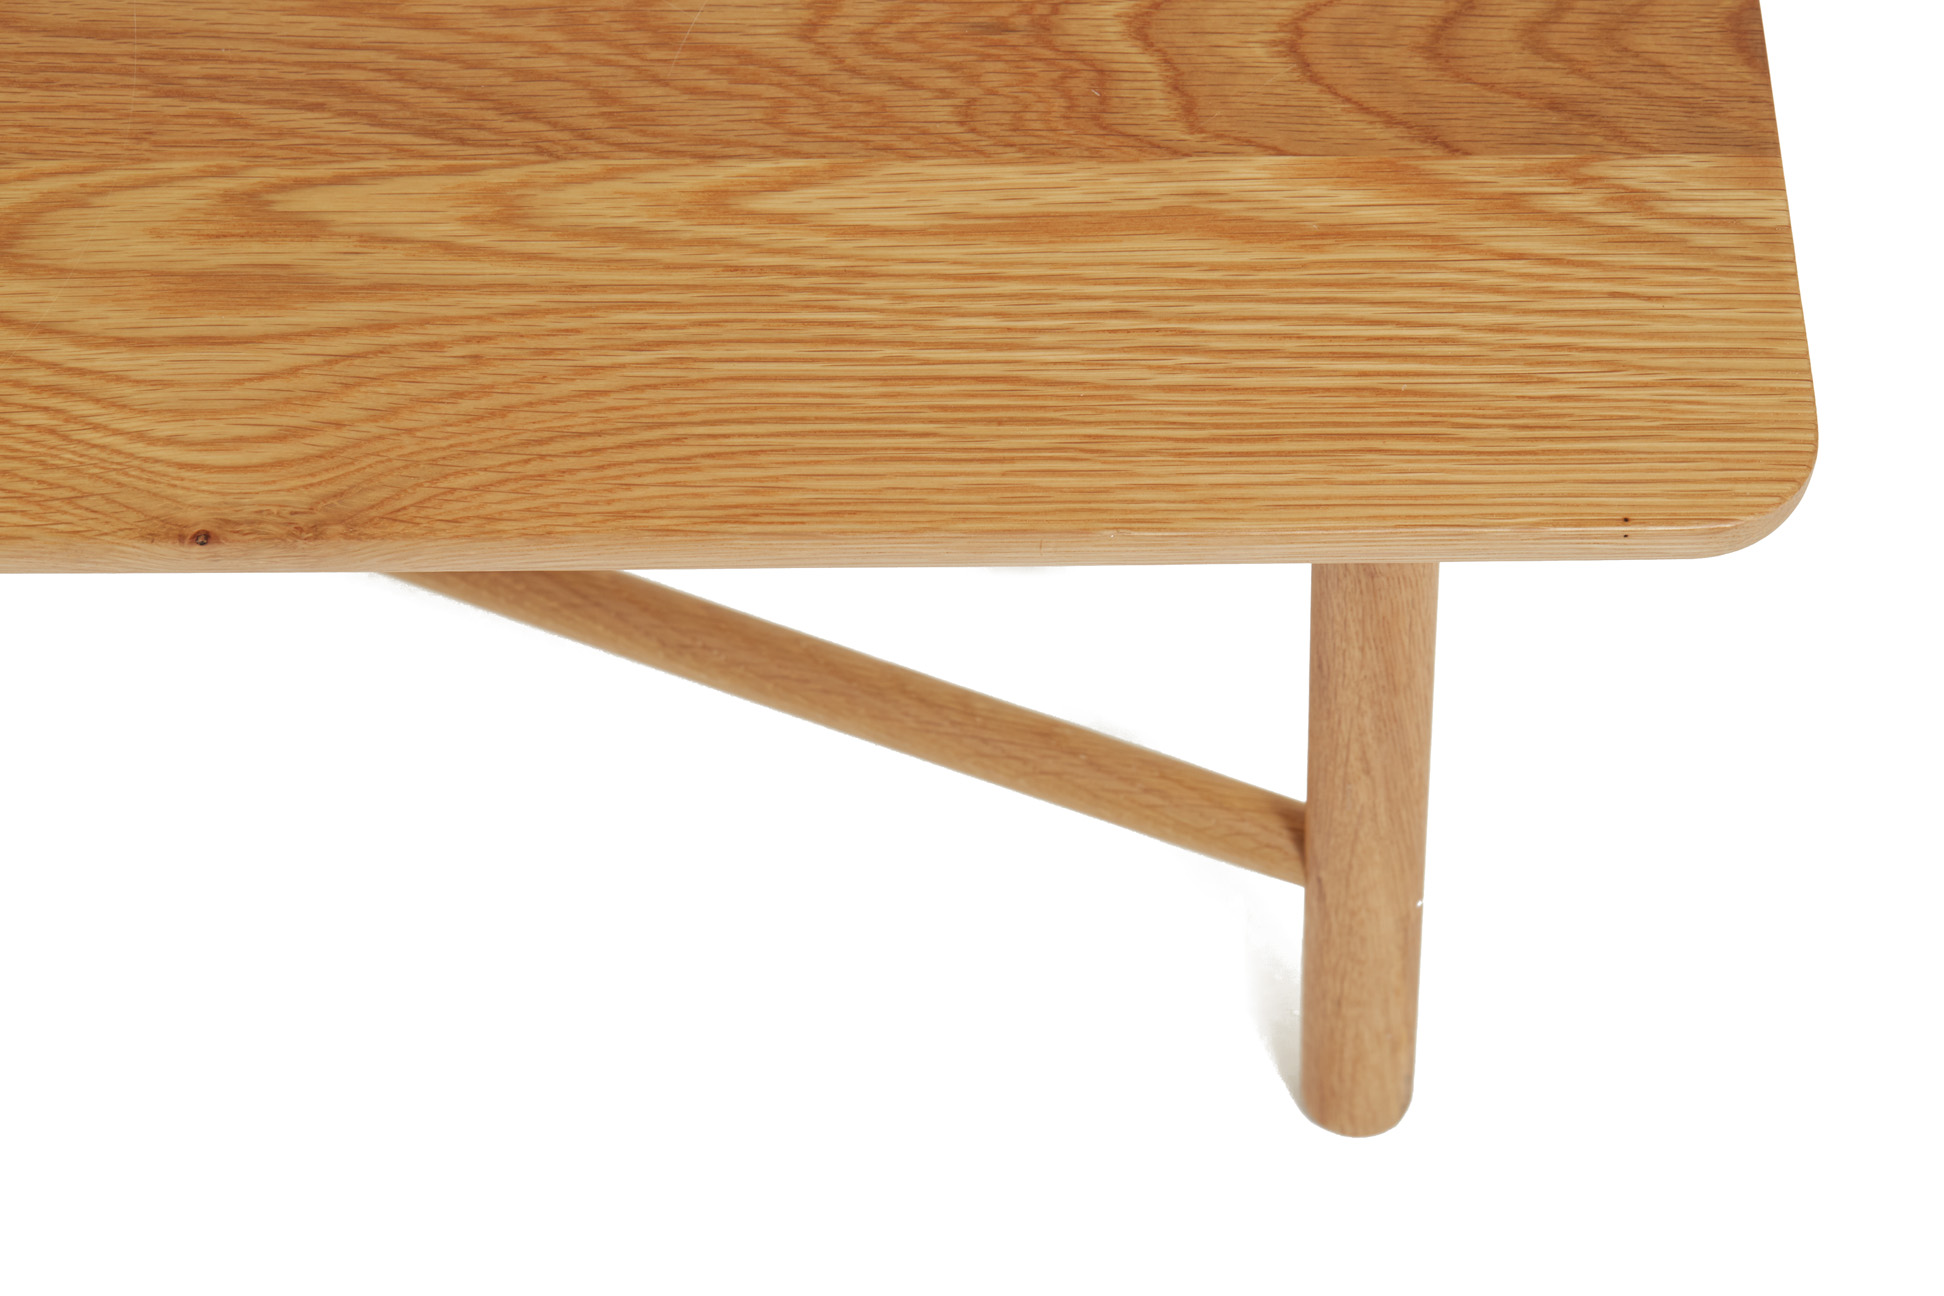 A CONTEMPORARY RECTANGULAR OAK COFFEE TABLE - Image 3 of 3